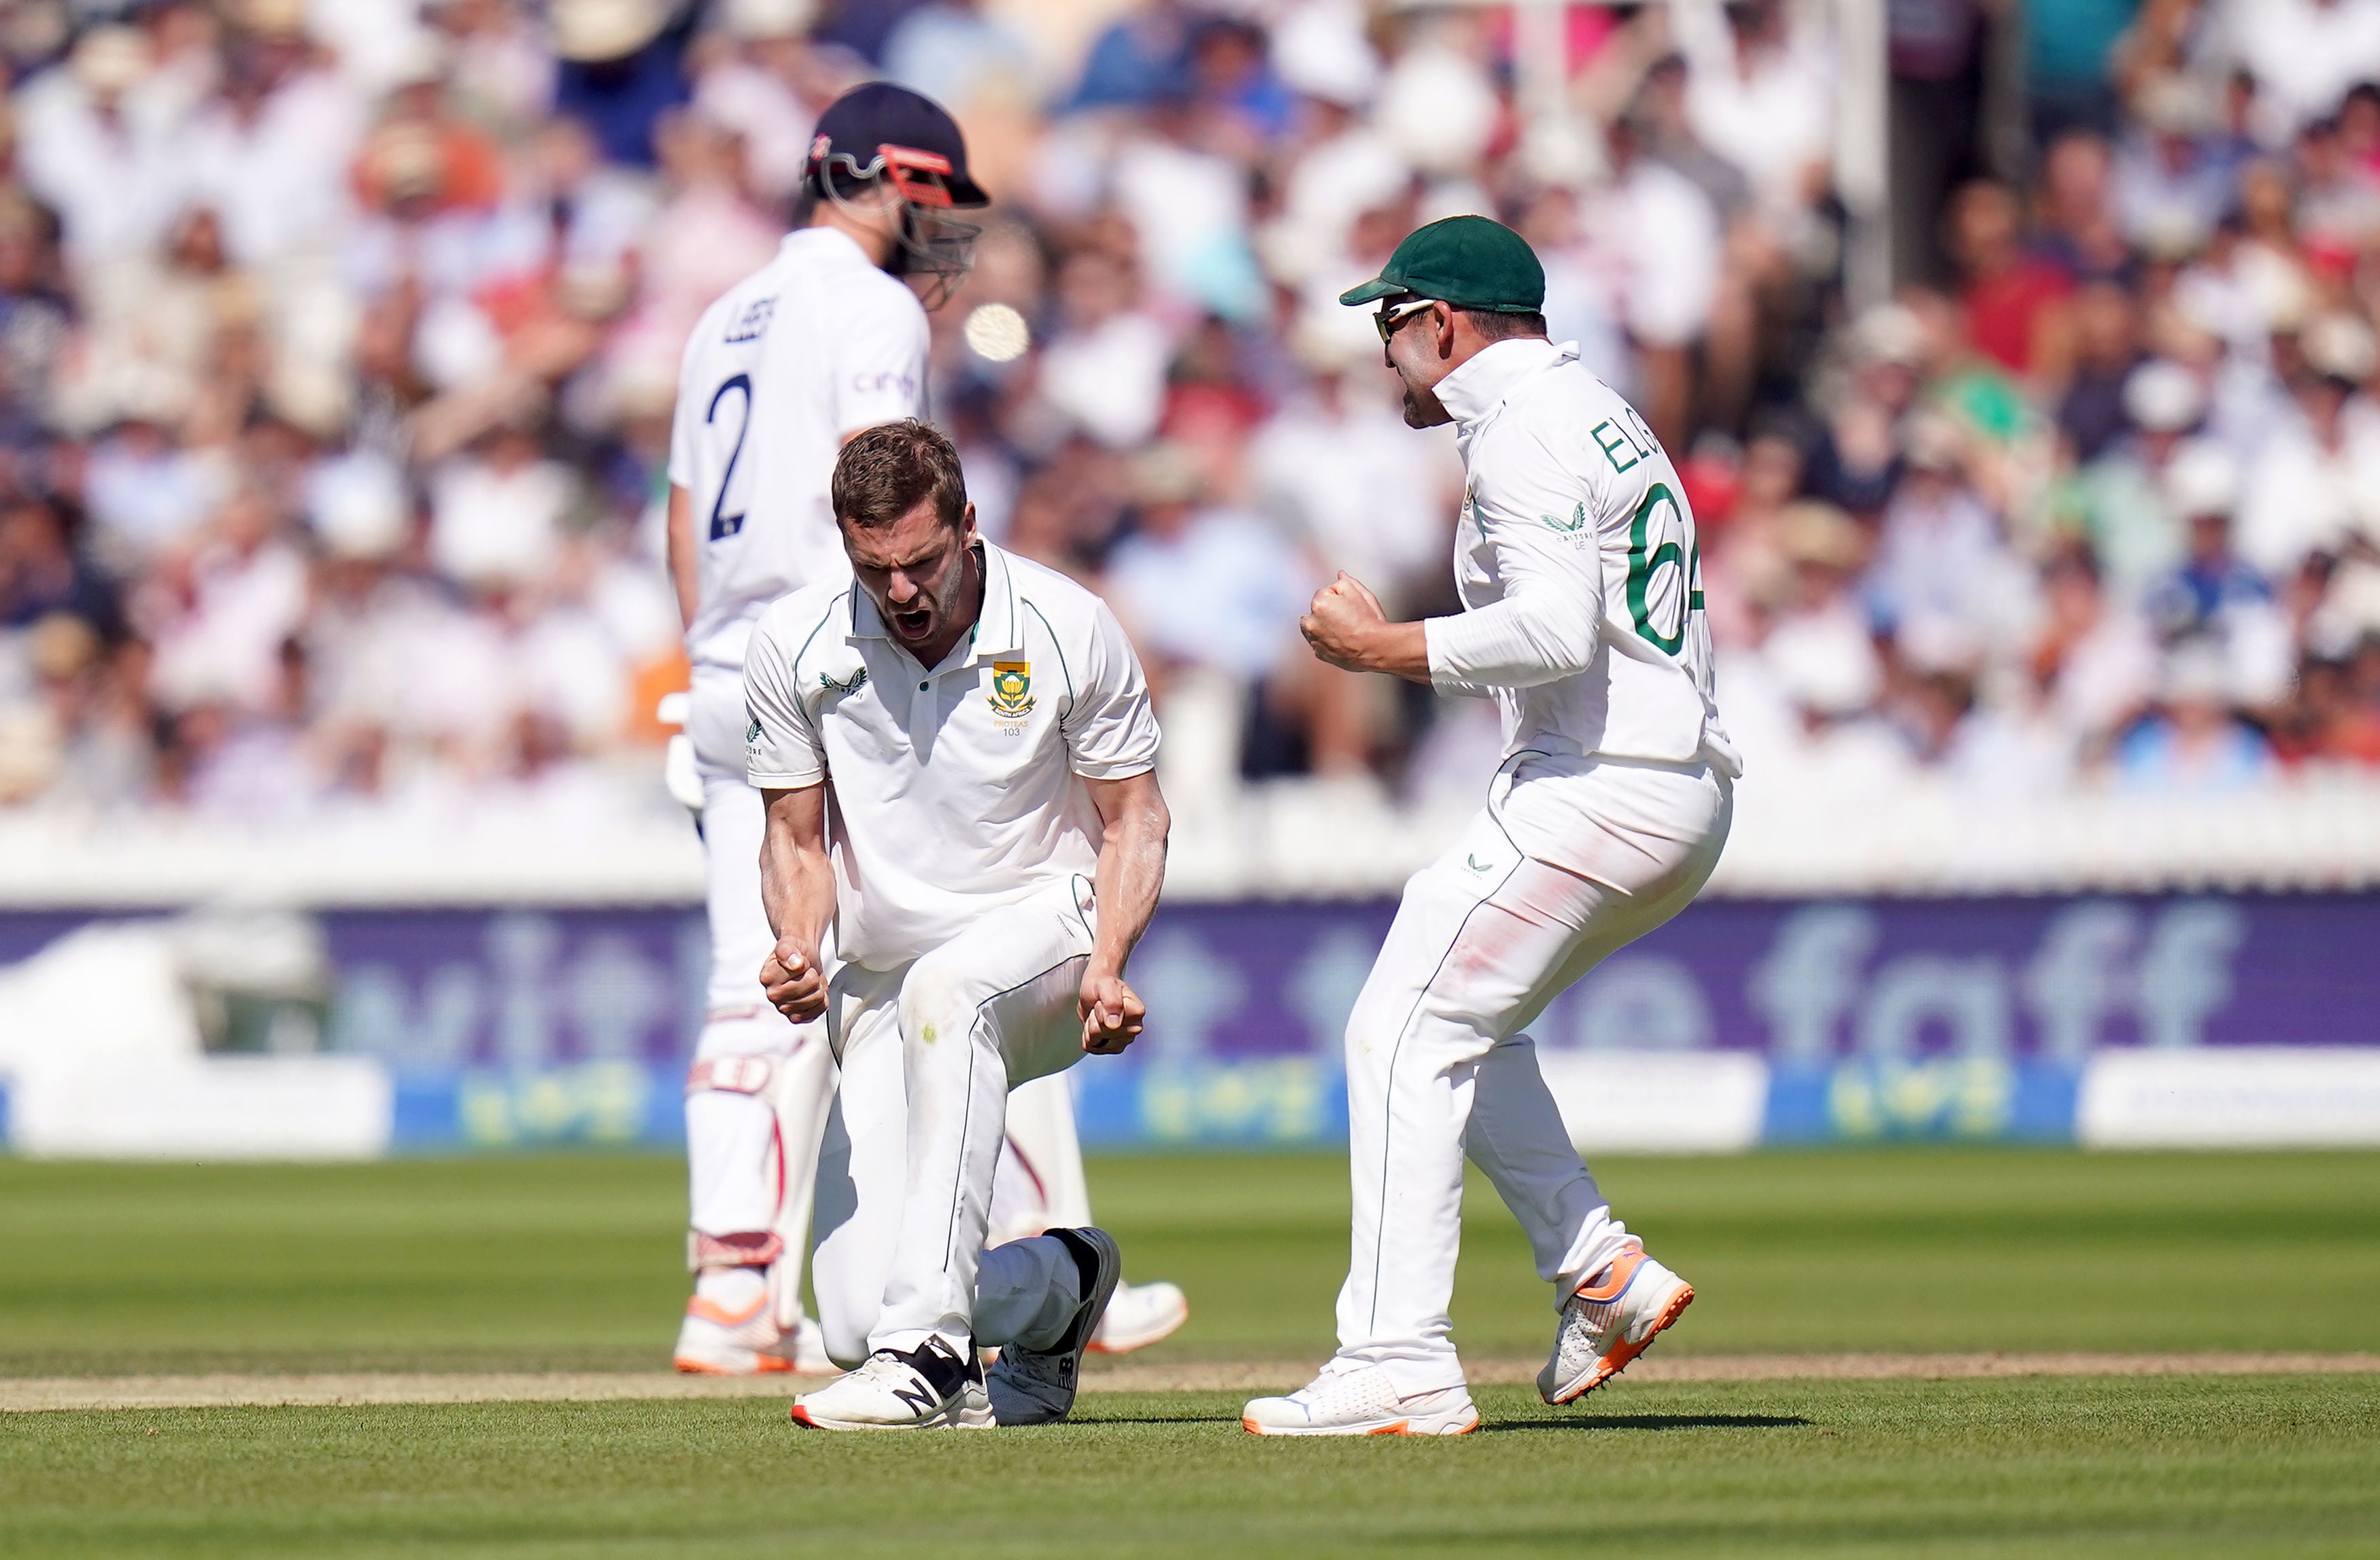 England vs South Africa LIVE Cricket result and scorecard from first Test at Lords as England thrashed by an innings after batting collapse The Independent